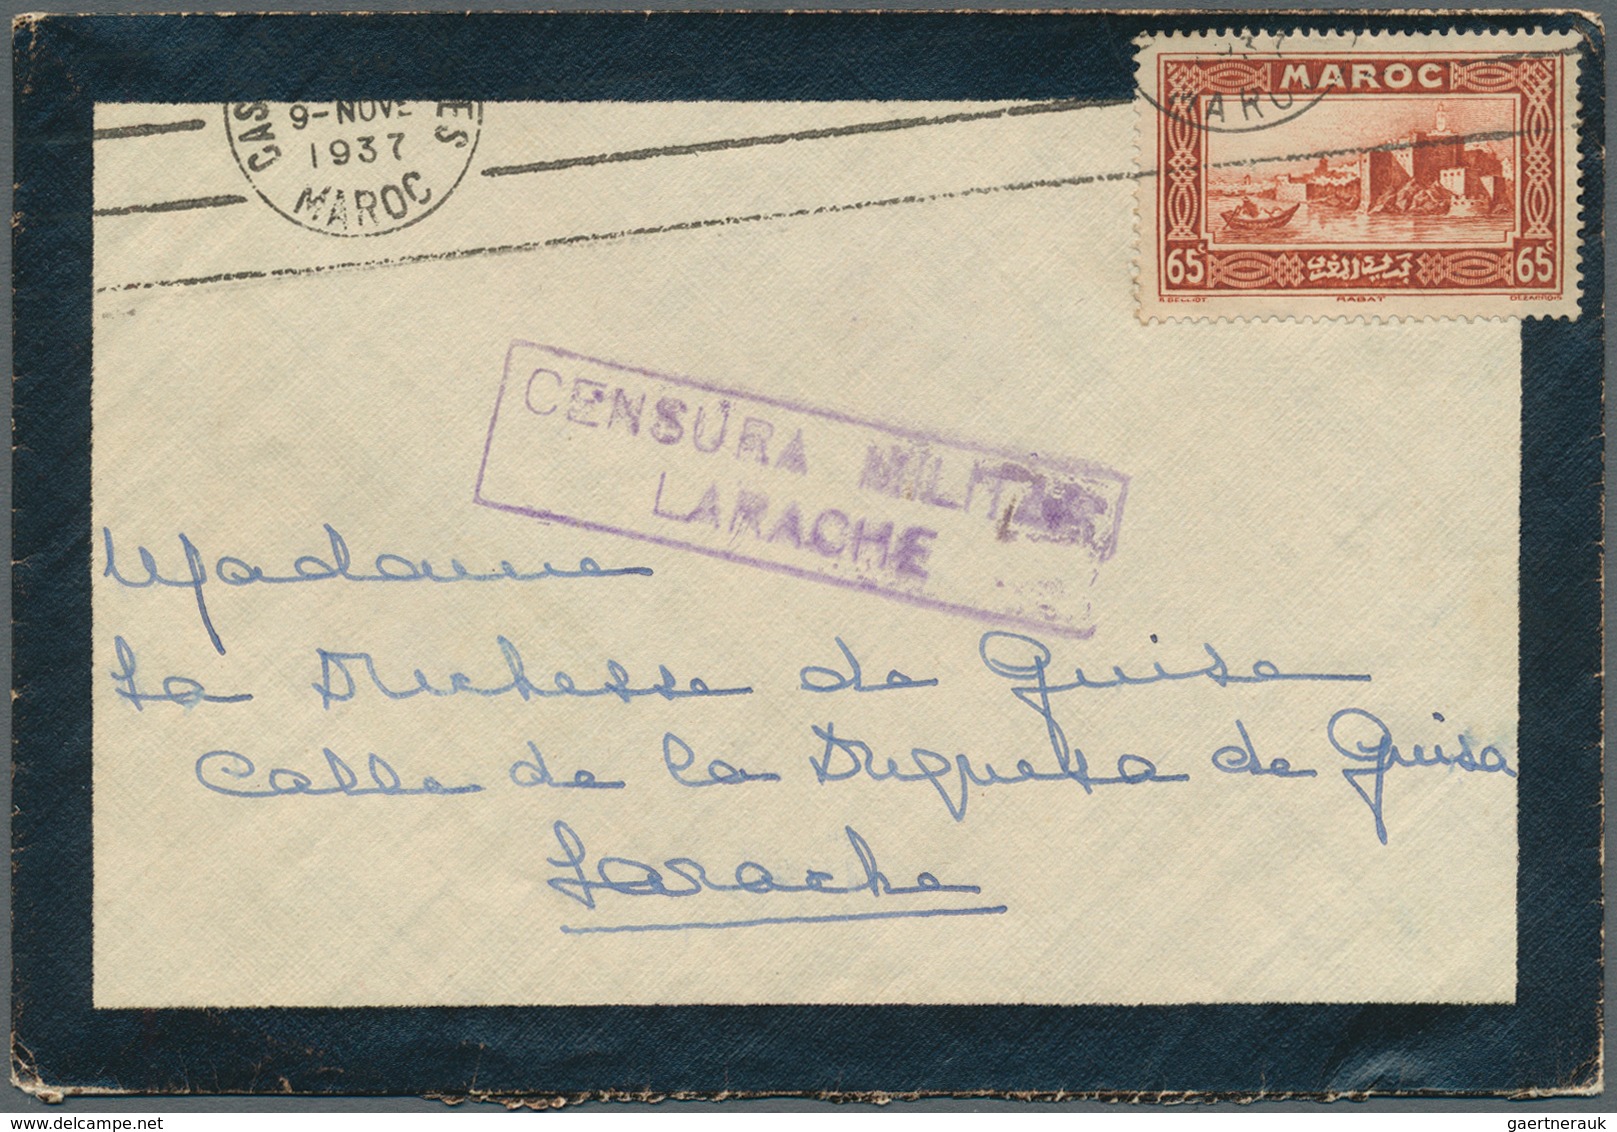 28235 Spanien: 1843/1944: 29 envelopes, picture postcards and postal stationeries including censored mail,